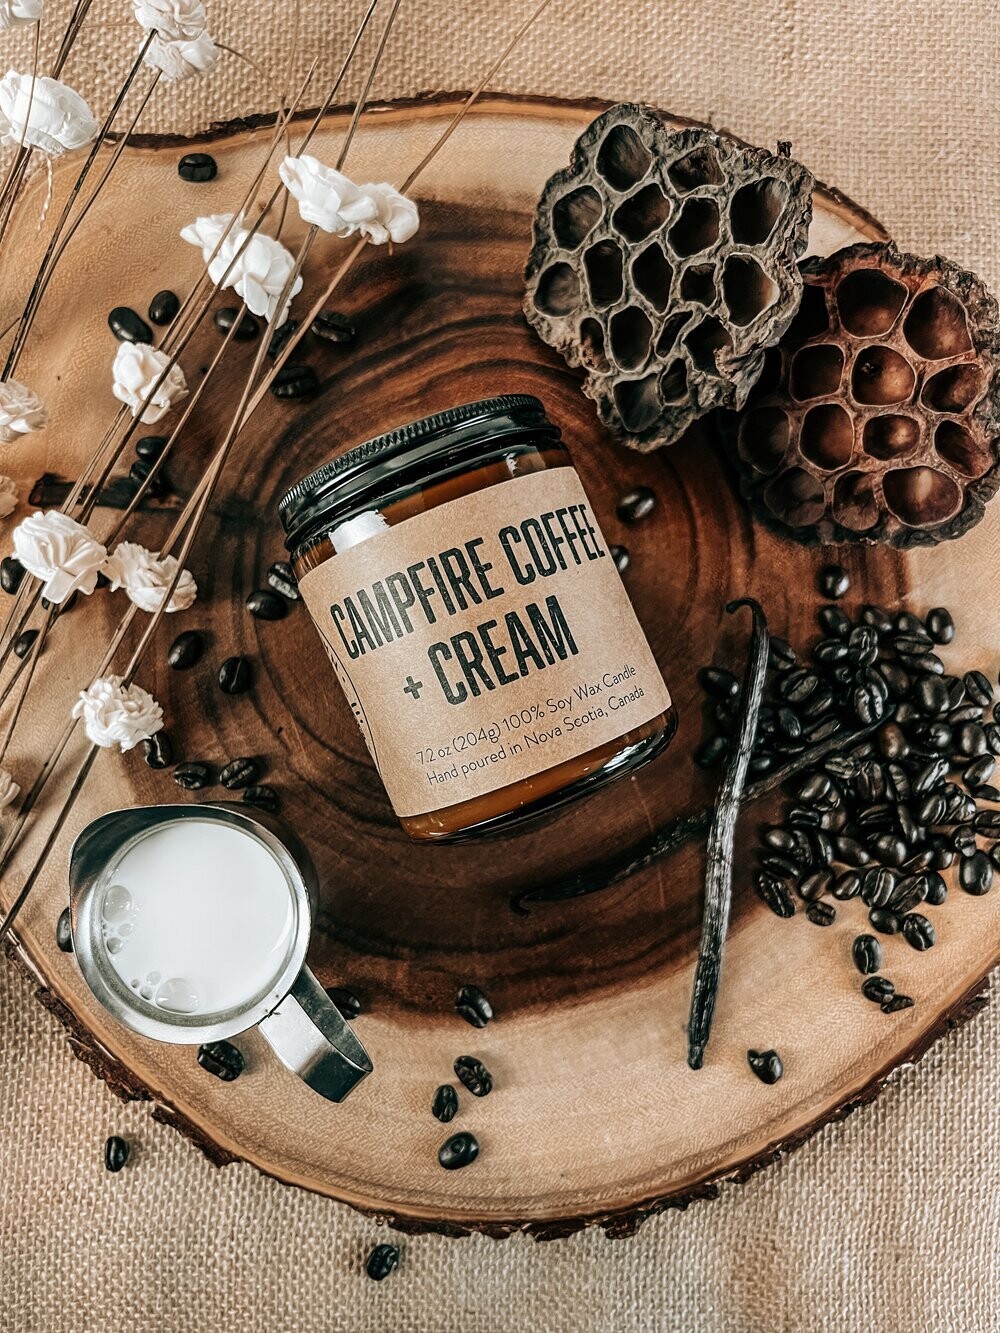 Campfire Coffee and Cream - Lawrencetown Candle Co